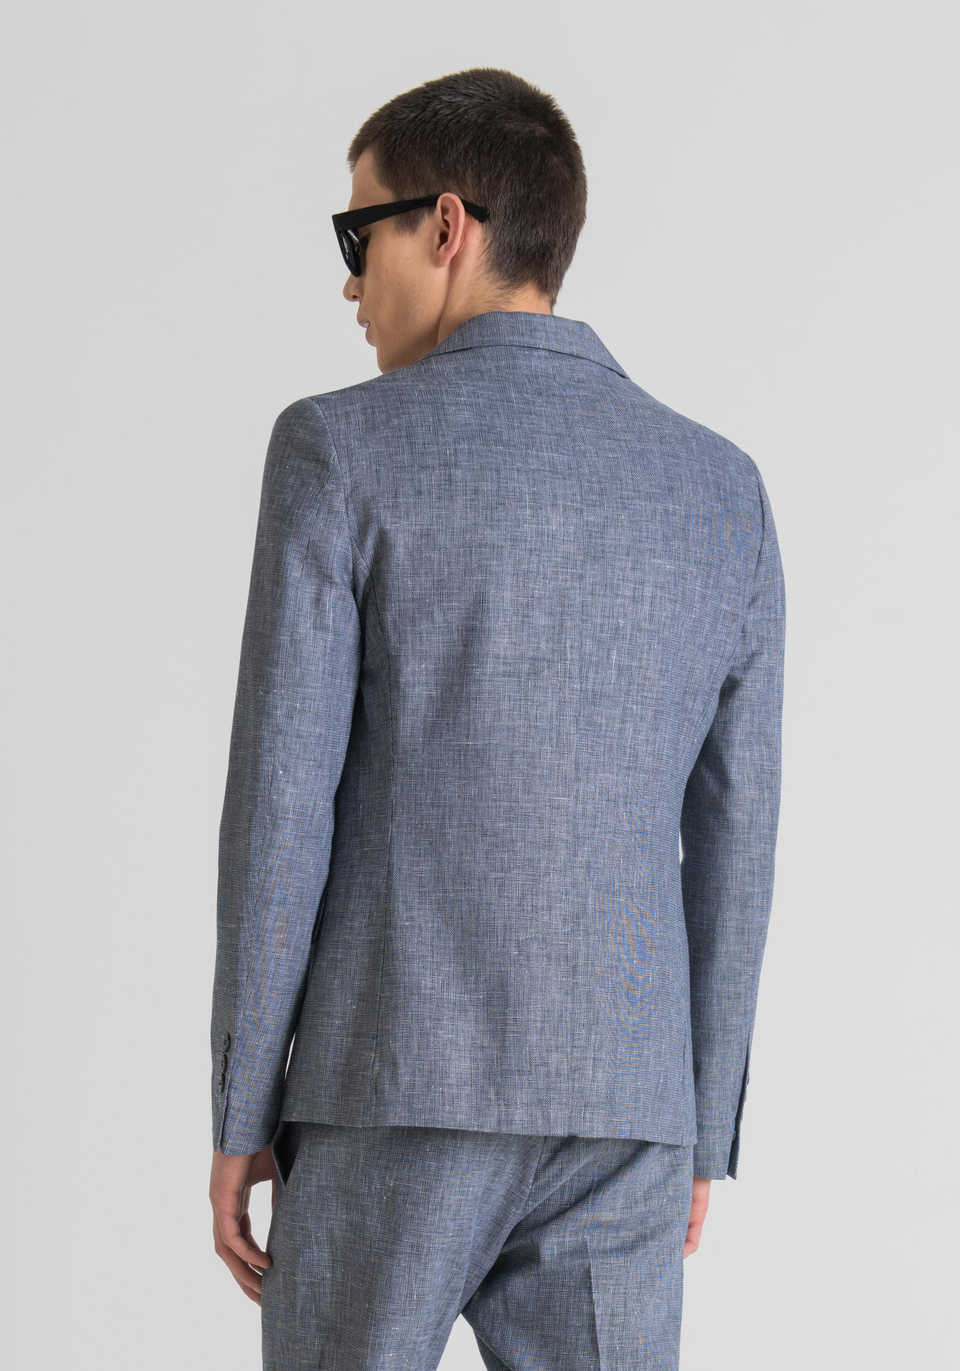 SLIM-FIT “ZELDA” SINGLE-BREASTED JACKET IN A TWO-TONE FABRIC - Antony Morato Online Shop